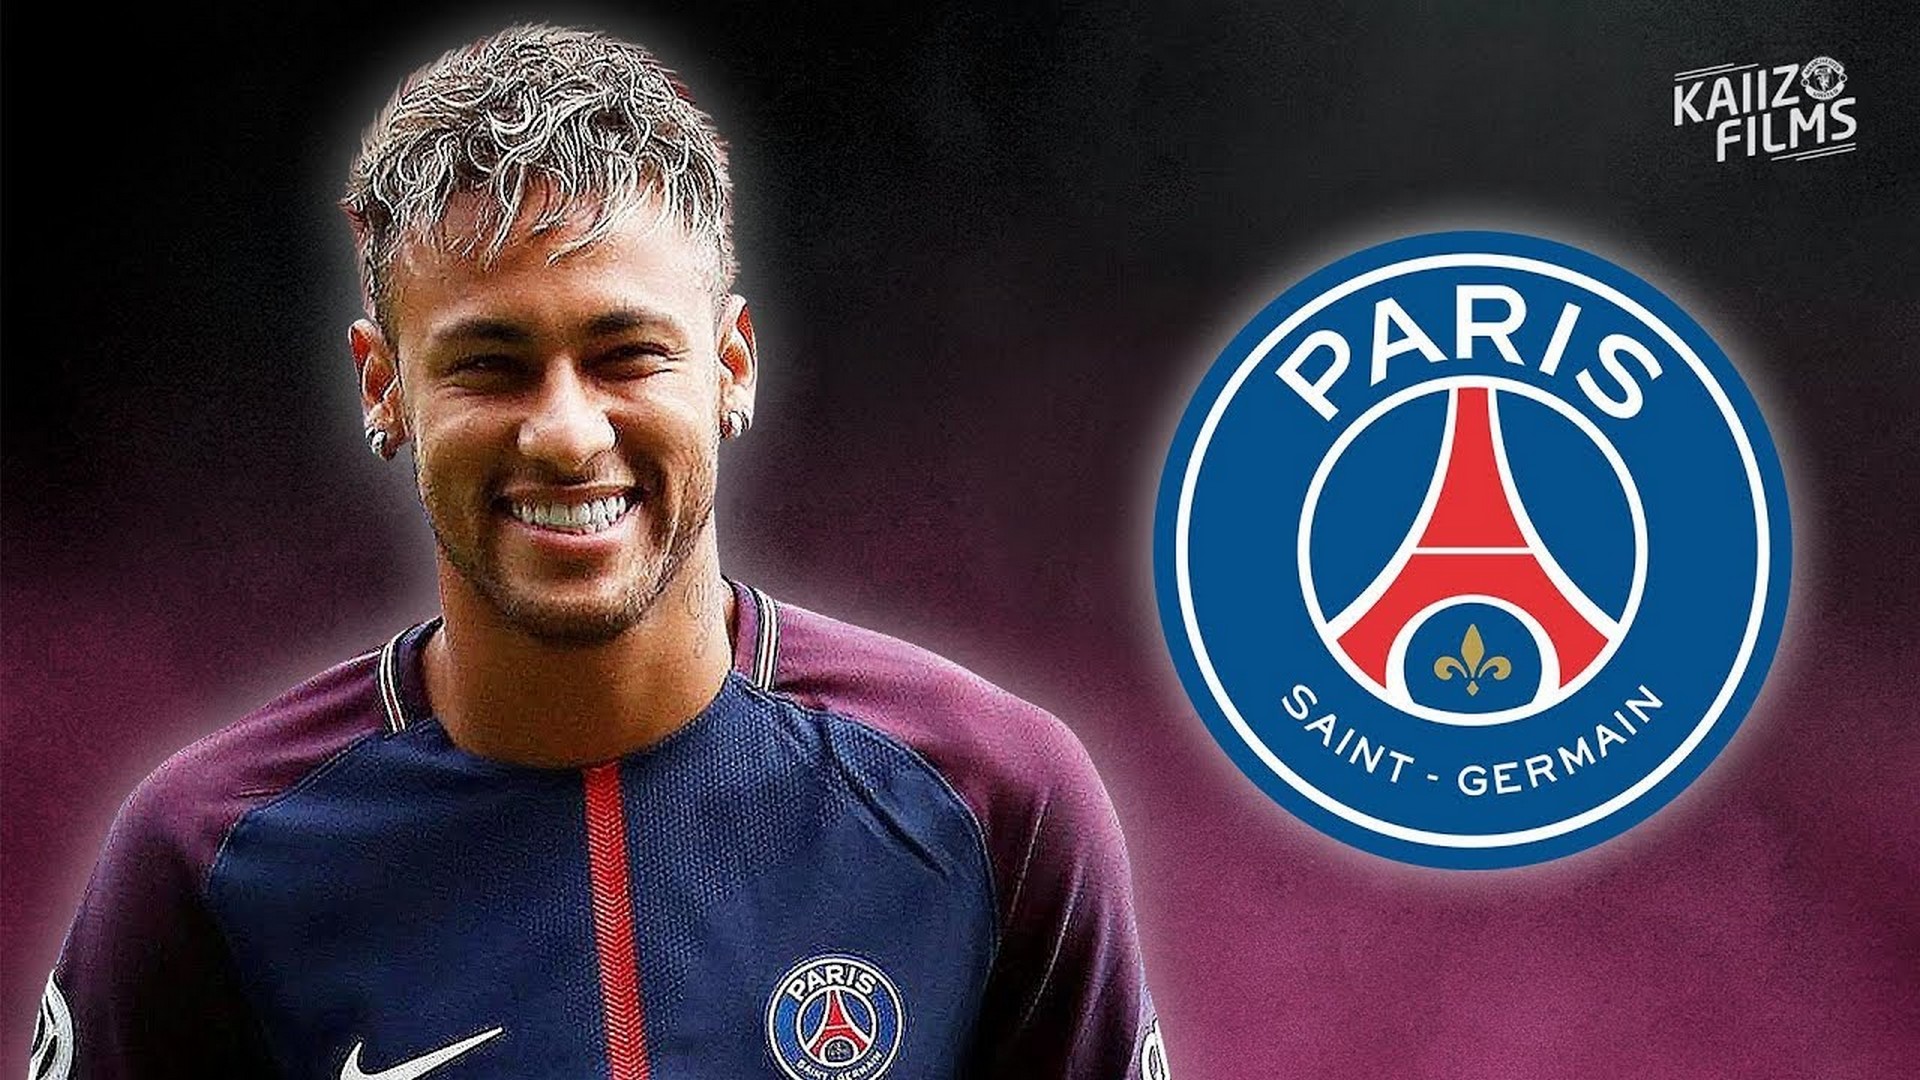 Neymar PSG Desktop Wallpaper with resolution 1920X1080 pixel. You can use this wallpaper as background for your desktop Computer Screensavers, Android or iPhone smartphones